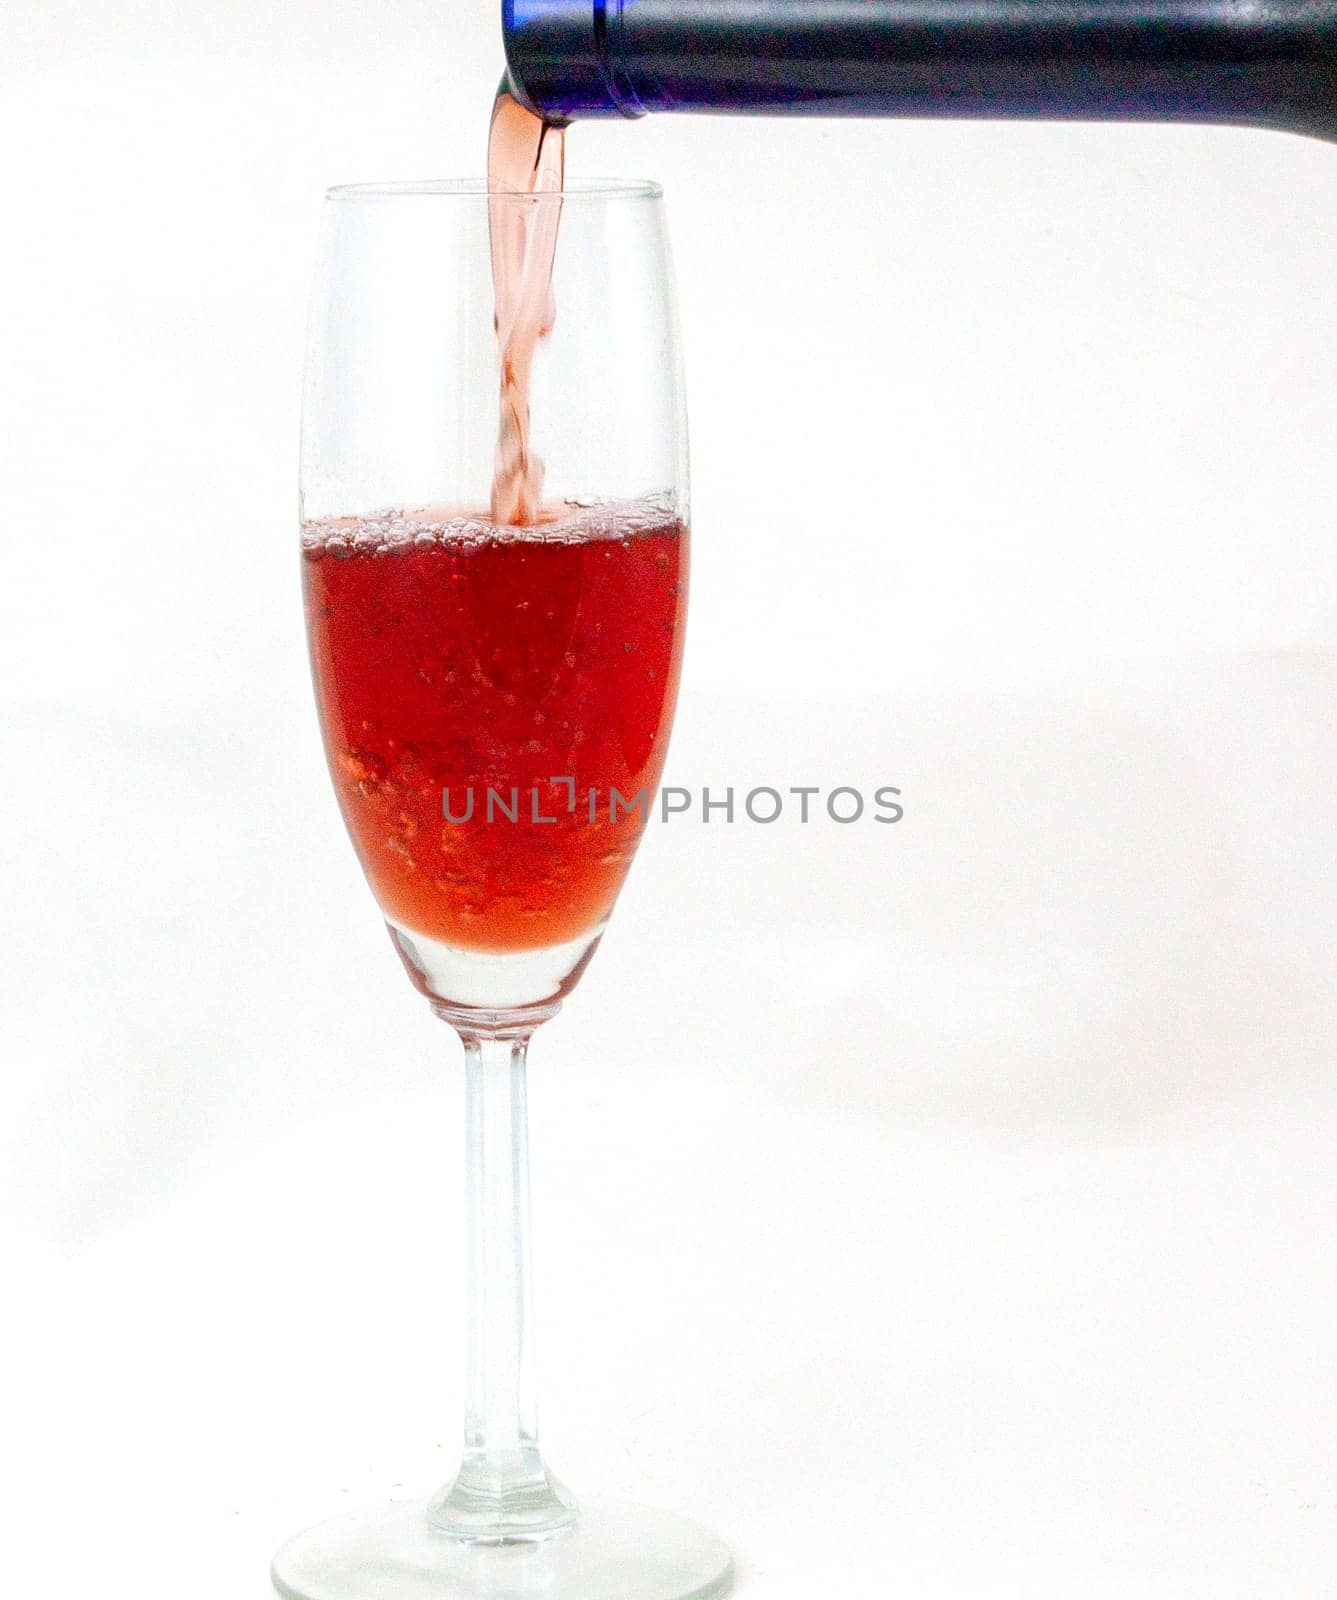 Pouring Dessert Wine in flute from a blue bottle